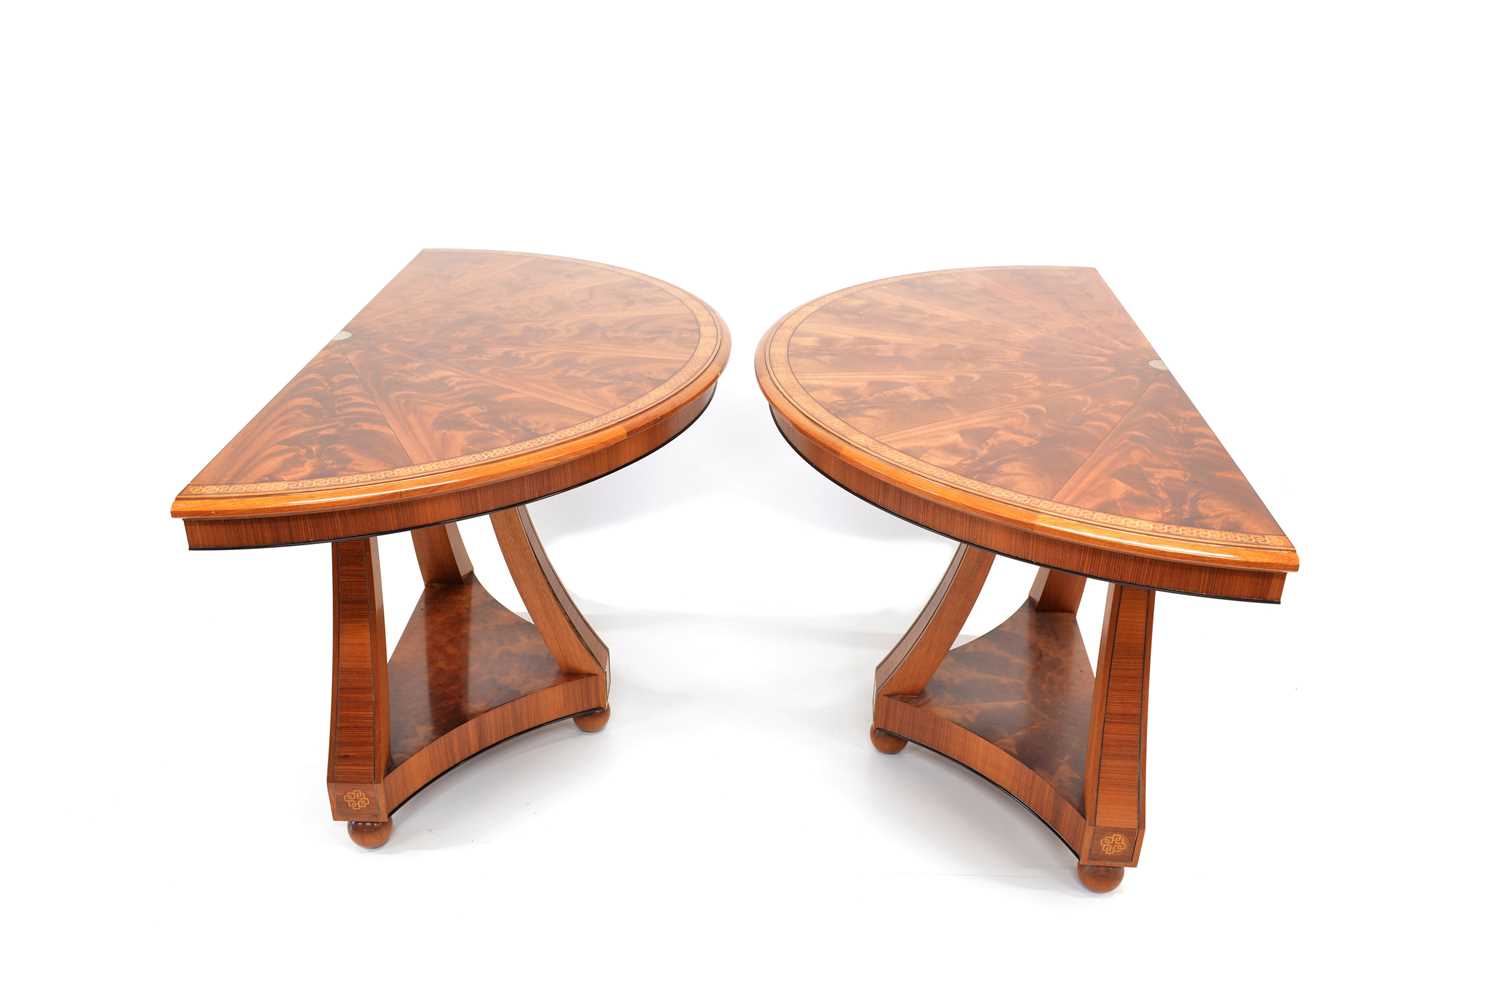 Pair of Mahogany side tables by Silver Linings workshop - Image 2 of 9